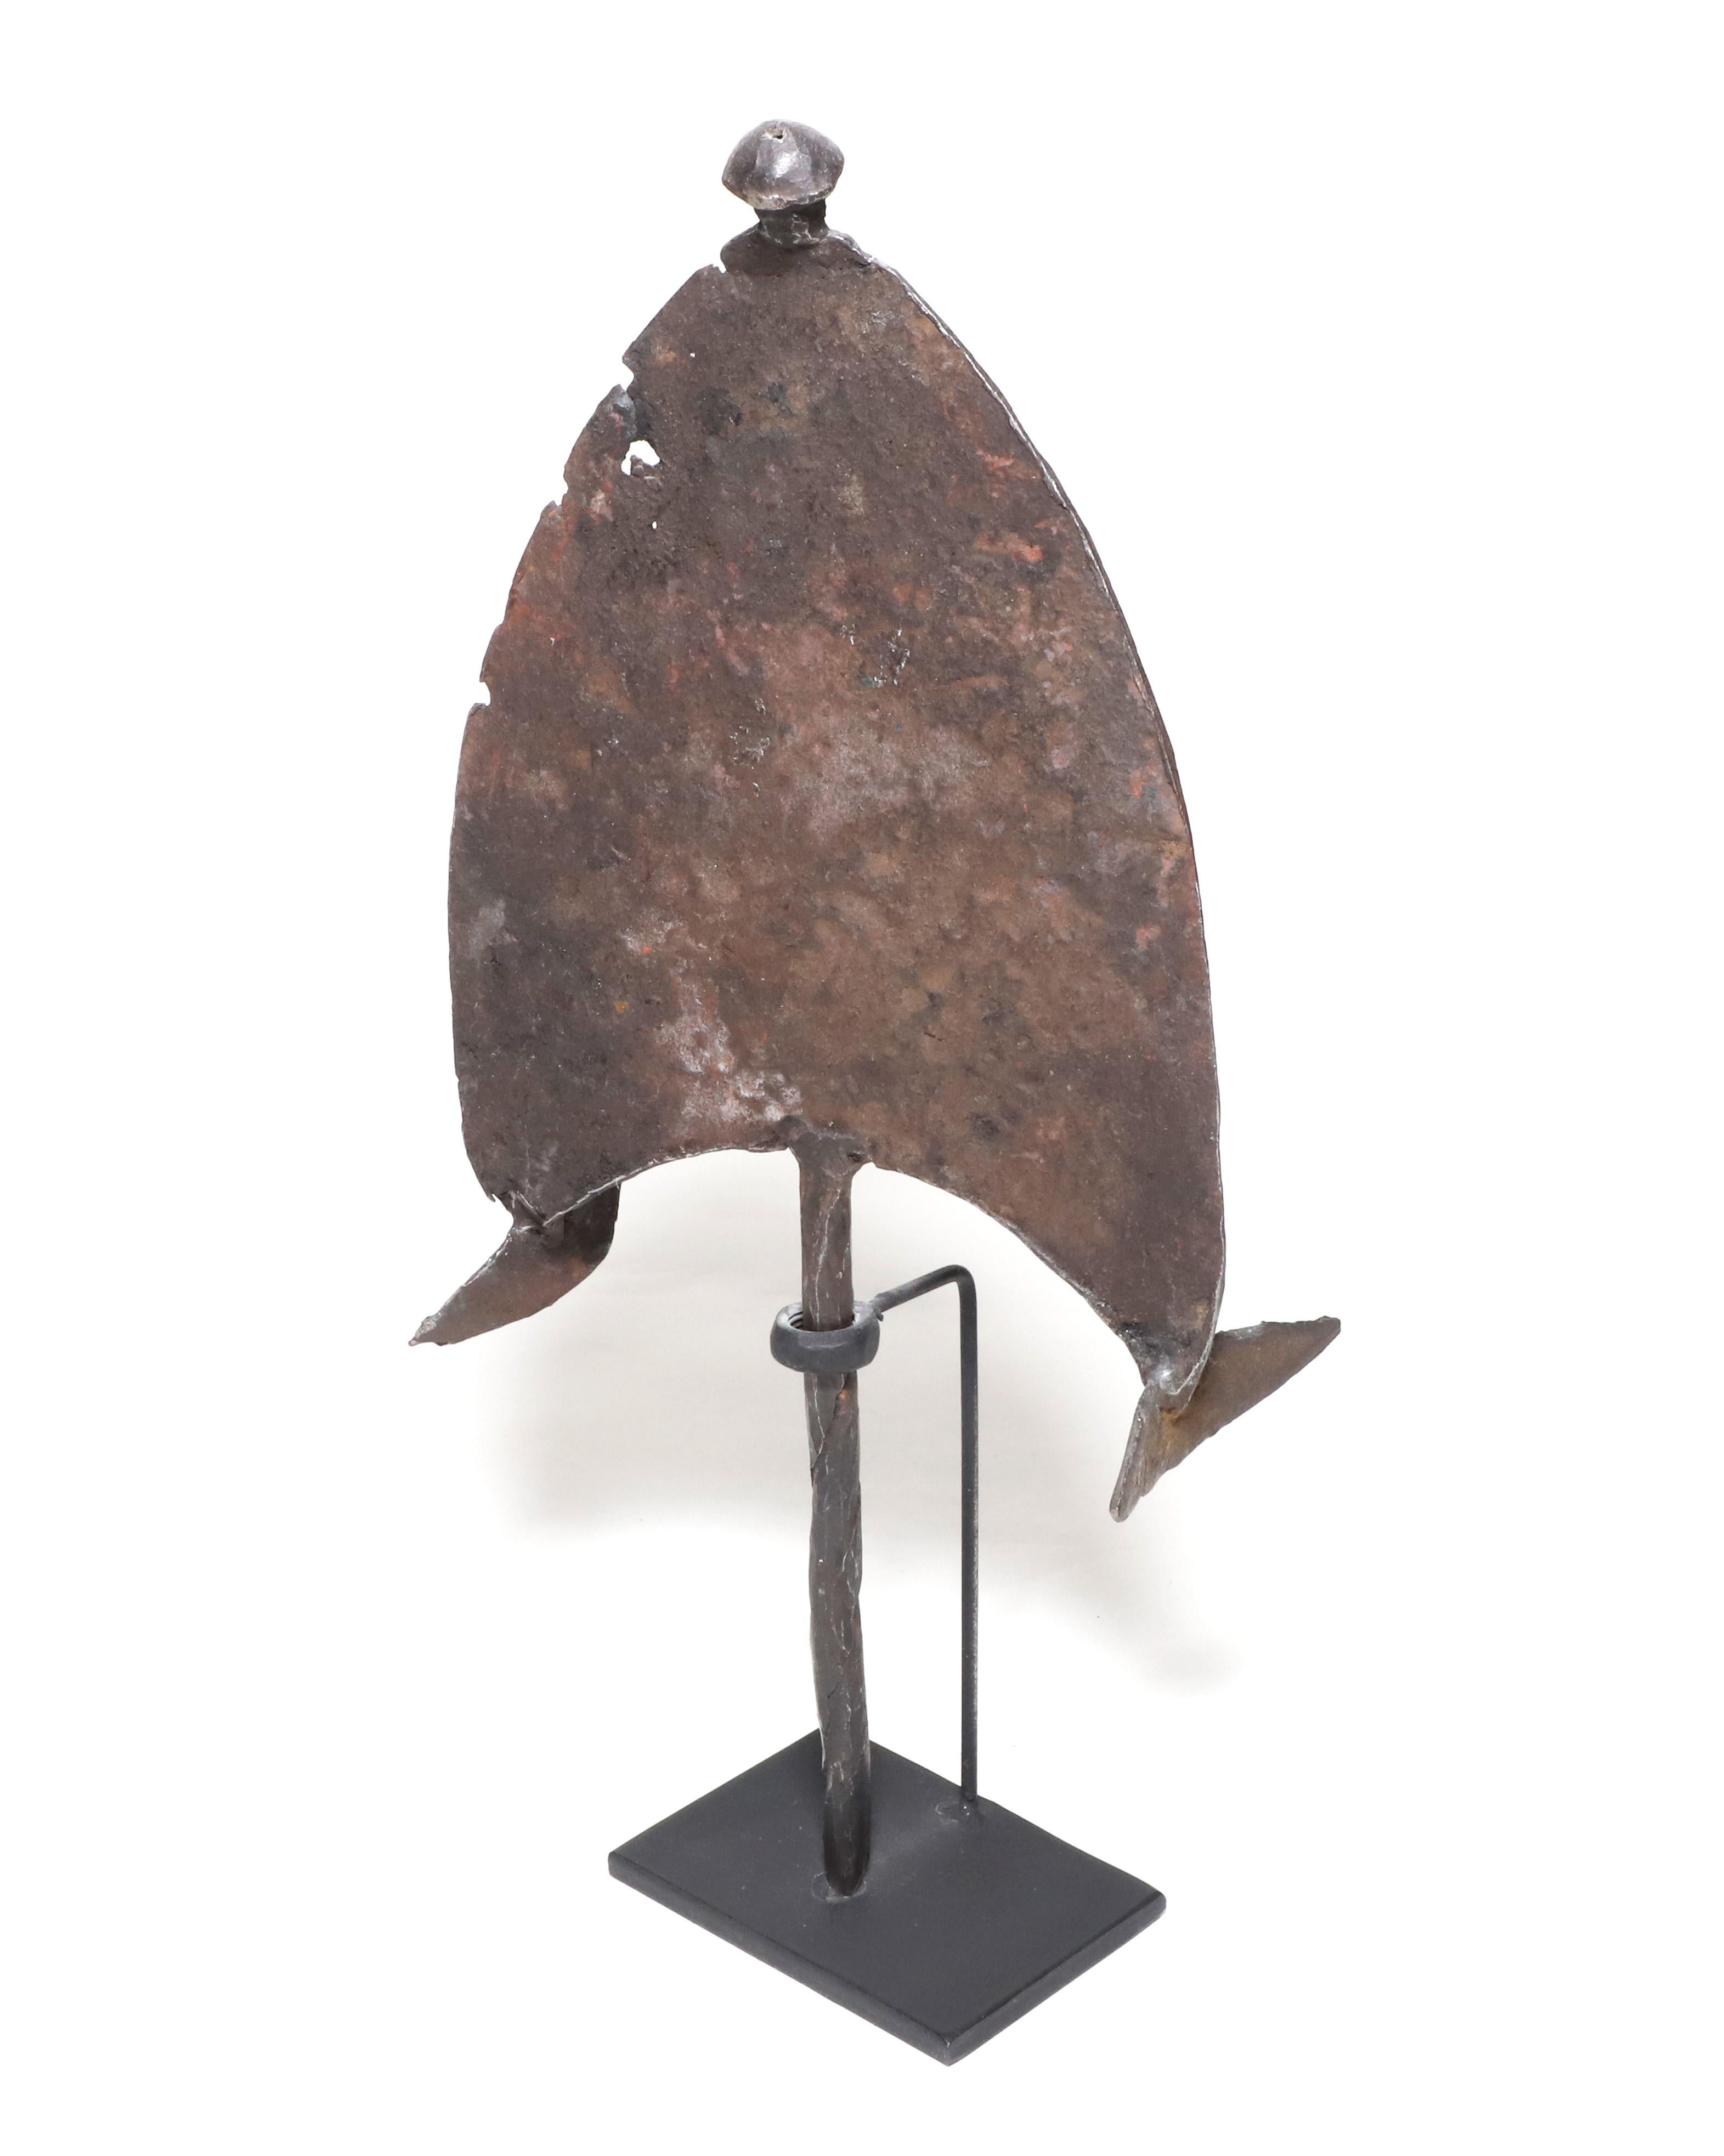 Rare Mbili currency used in the Ngbaka, Lobala and Bangala tribes in Congo. Circa Early 1800s, this spear point form is made in iron. It was used as a marriage contract payment. The thin folded wings on each side of the spear attest to the excellent